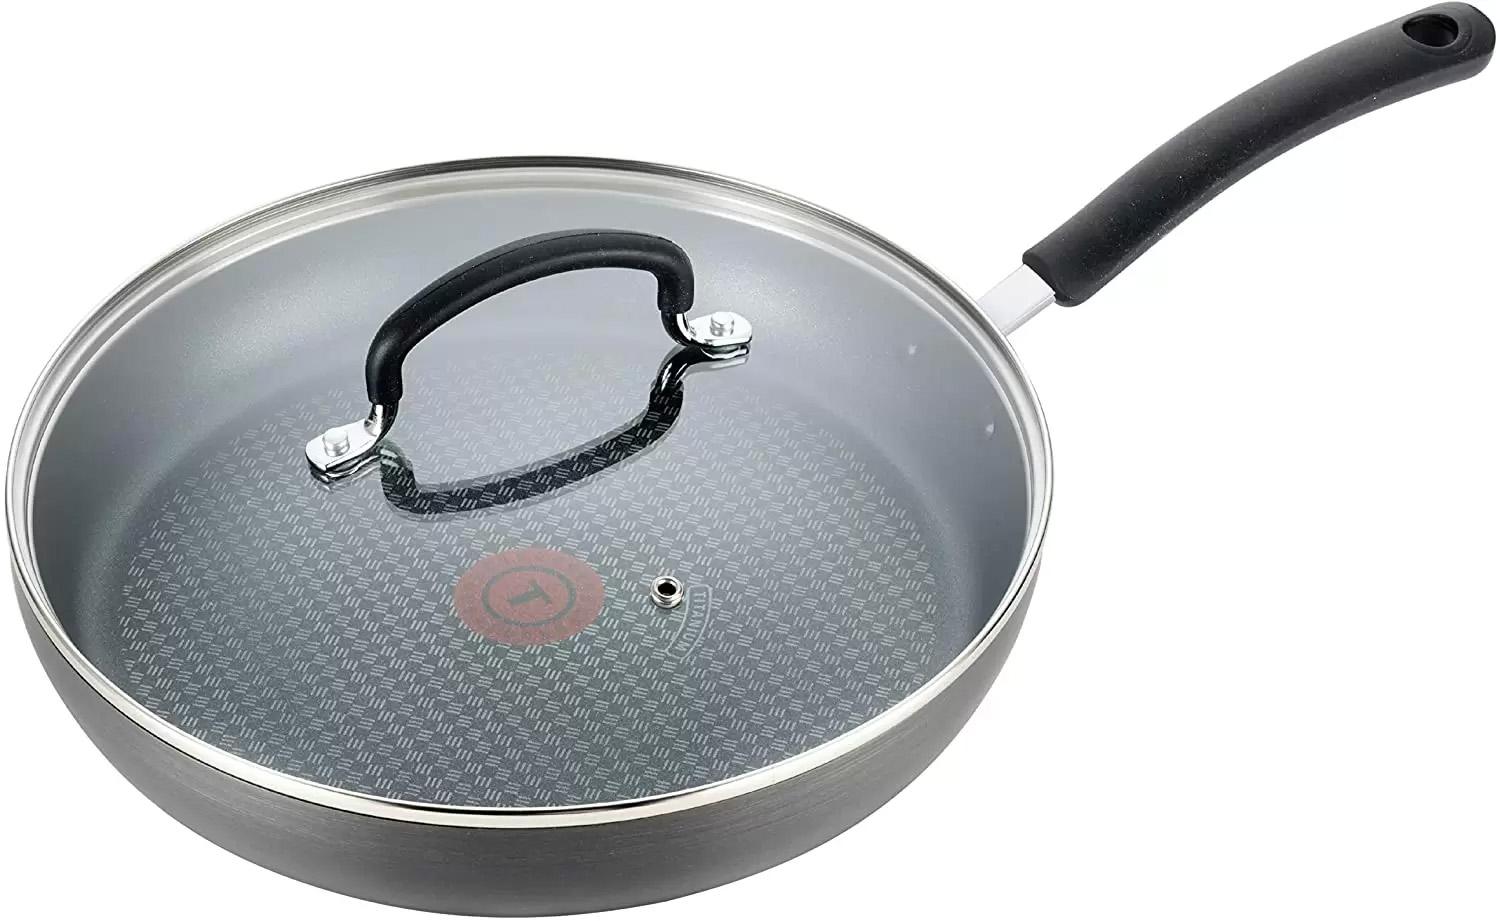 T-fal Dishwasher Safe Cookware 12in Fry Pan for $27.40 Shipped